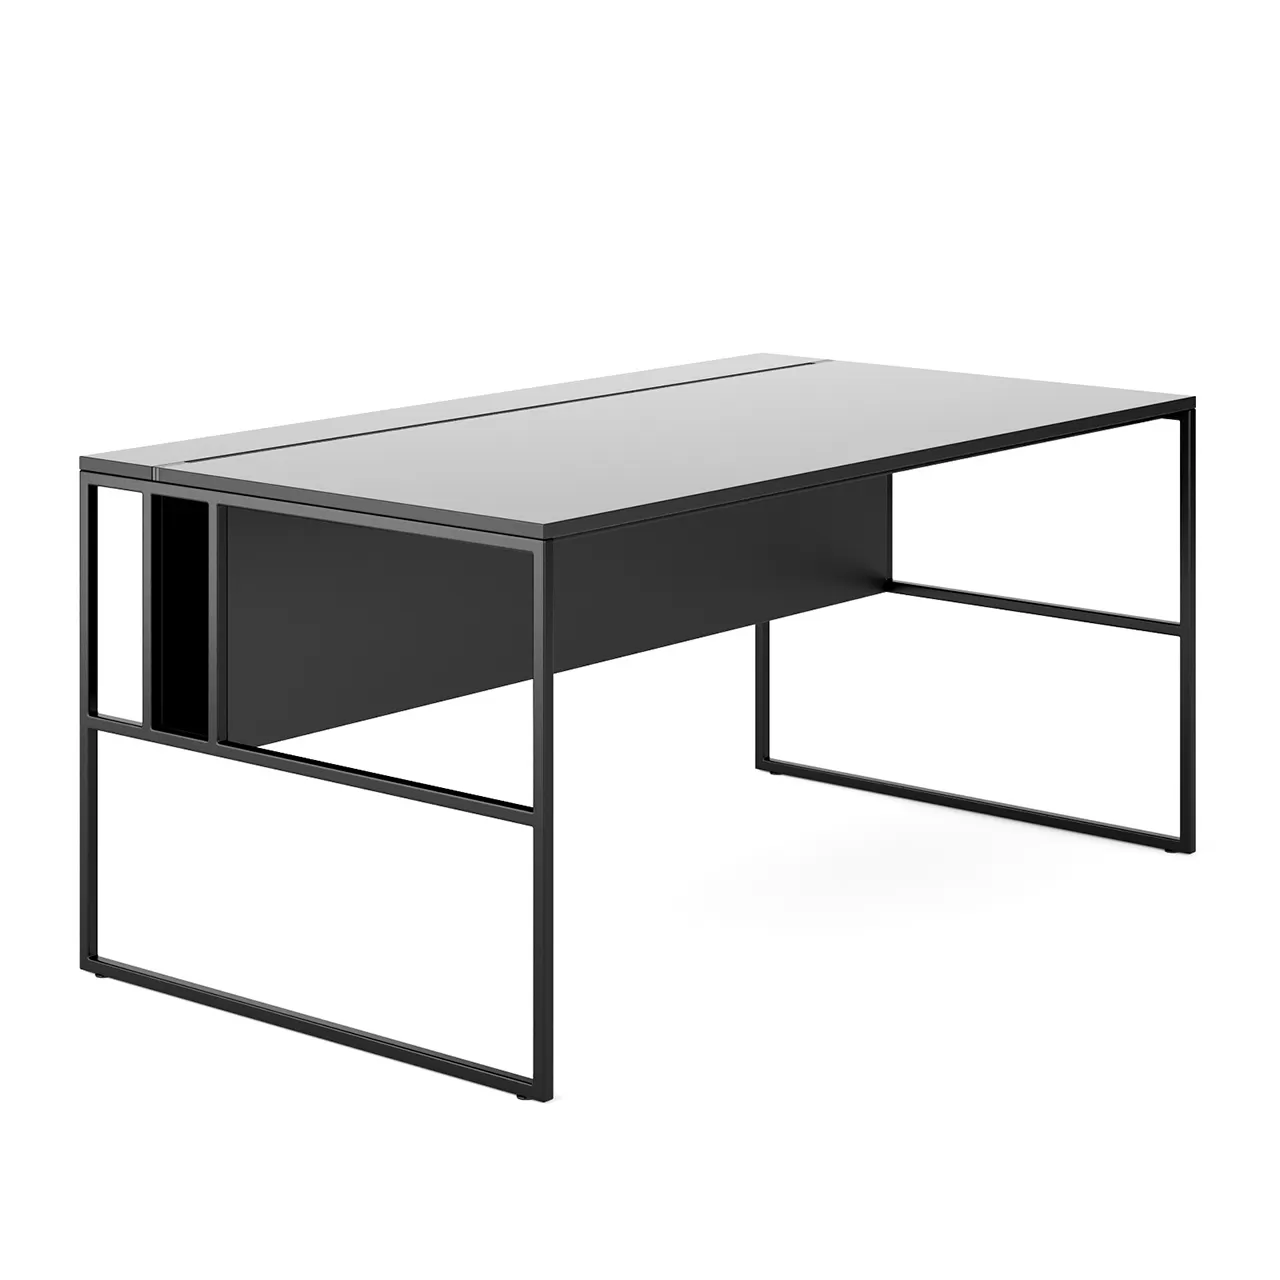 Office – venti-single-table-system-by-mdf-italia